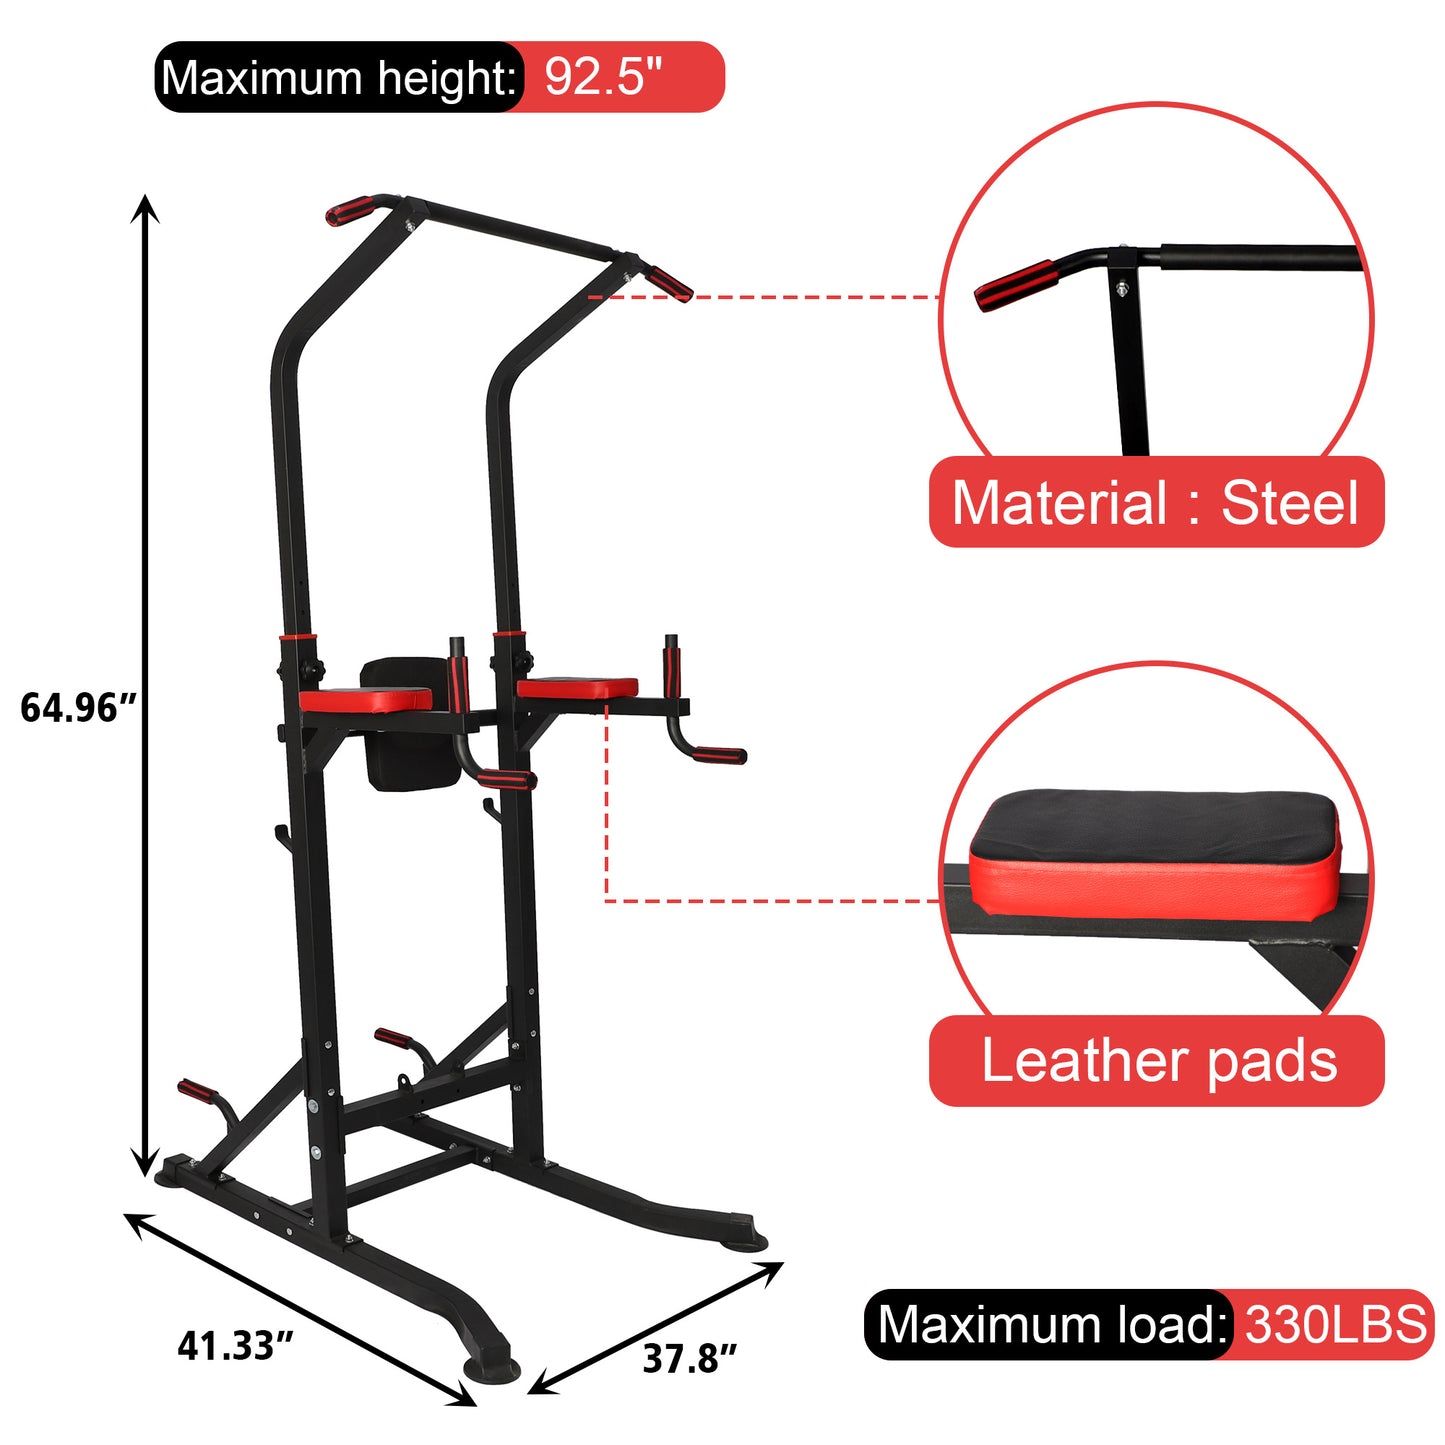 Bosonshop Power Tower Multi-Functional Pull Up Bar Dip Station Push Up Workout Exercise Equipment Height Adjustable Heavy Duty Strength Training Stand